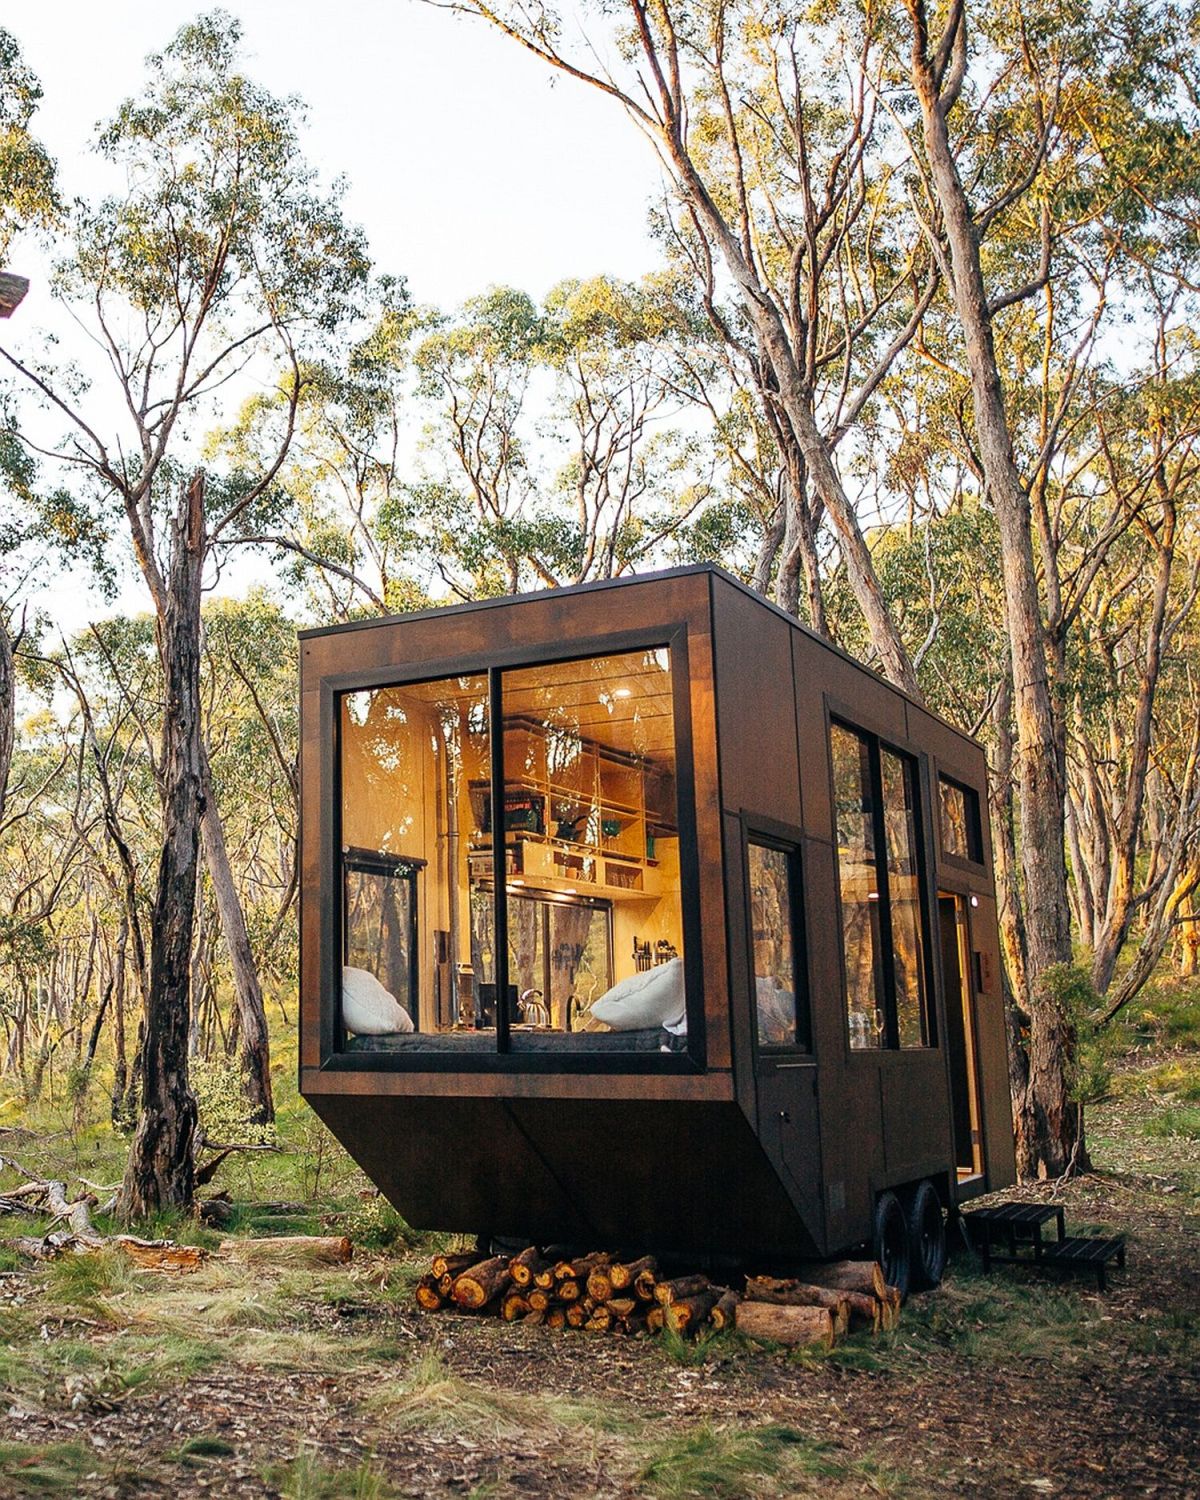 The cabin features a lot of windows to catch the views and fill the small space with light